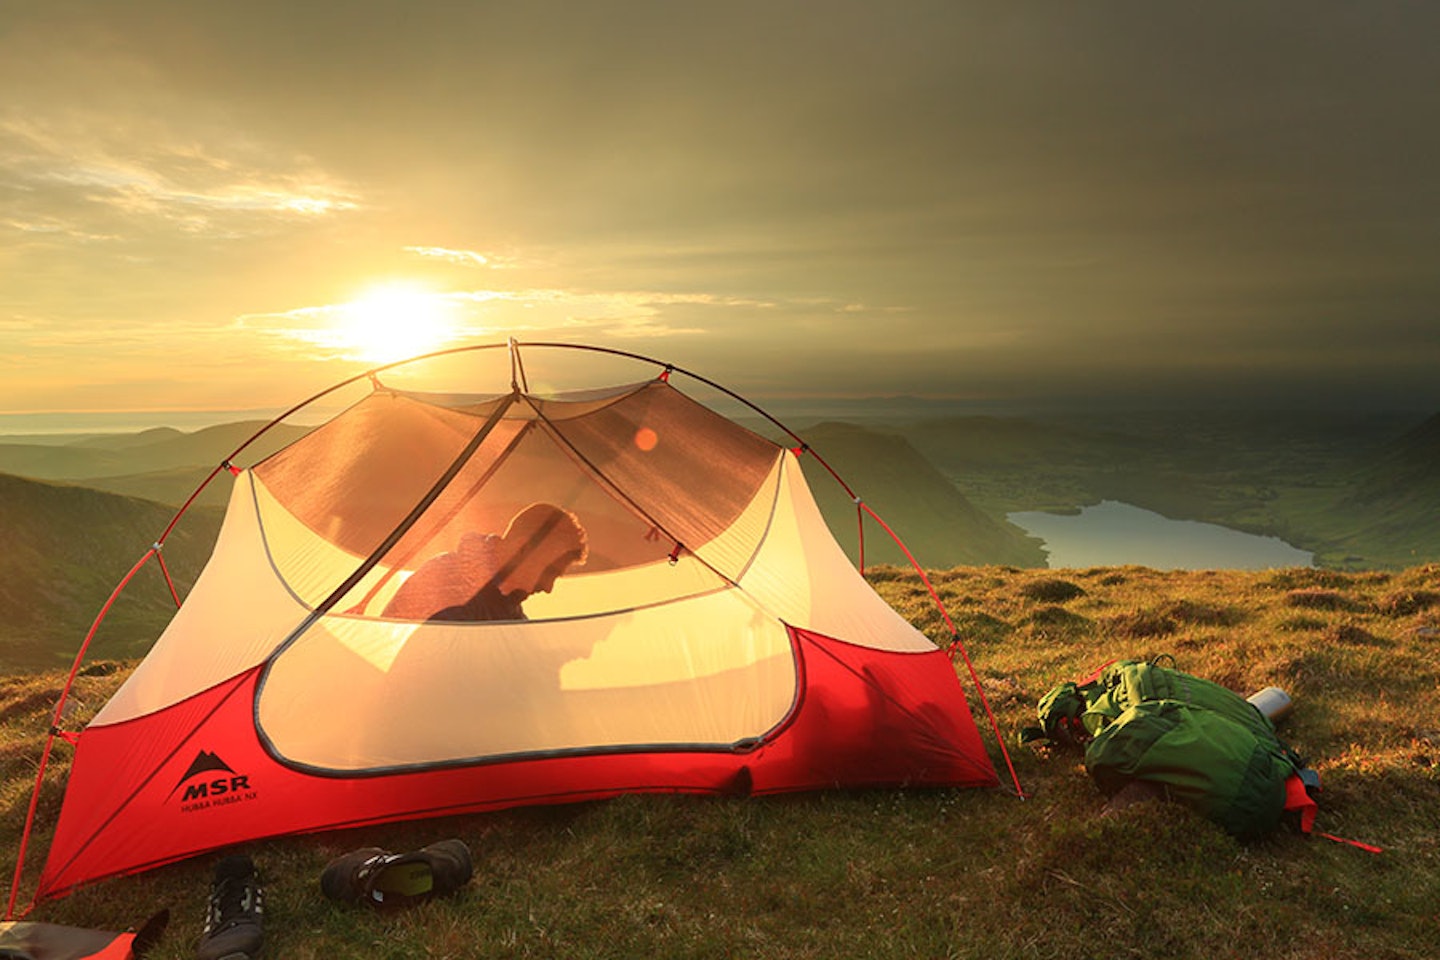 Sunset camping in a mesh tent with rucksack and mountain view